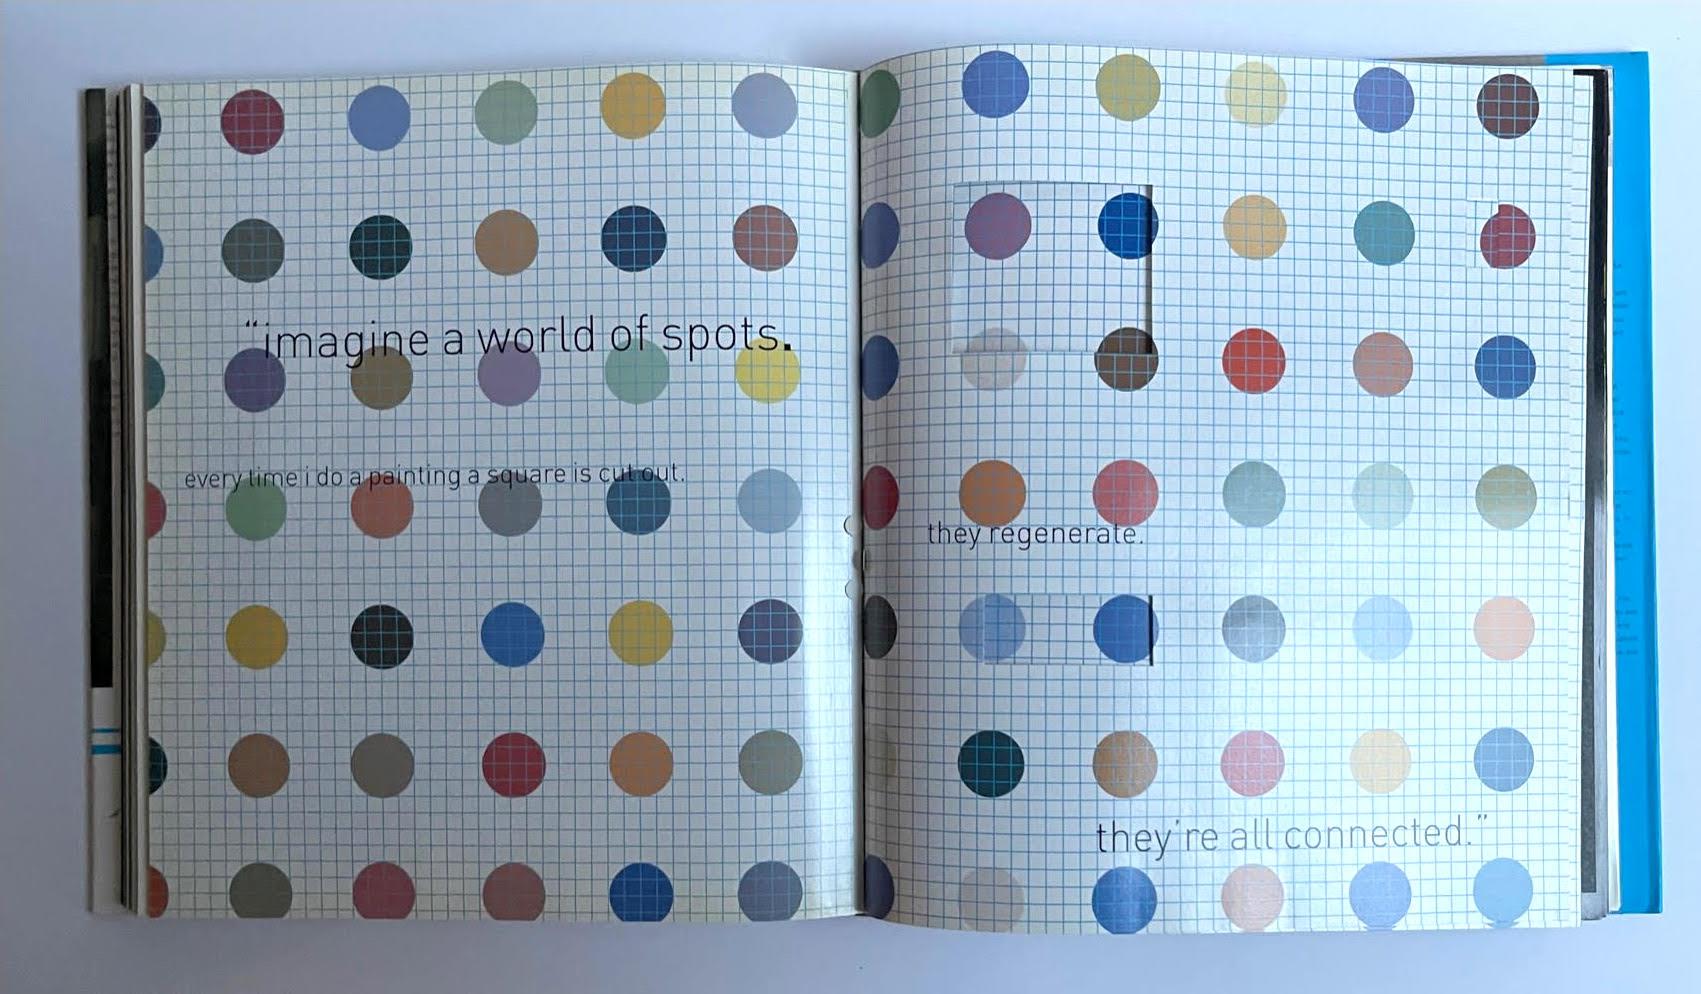 First edition hardback monograph (hand signed and inscribed by Hirst with heart) For Sale 1